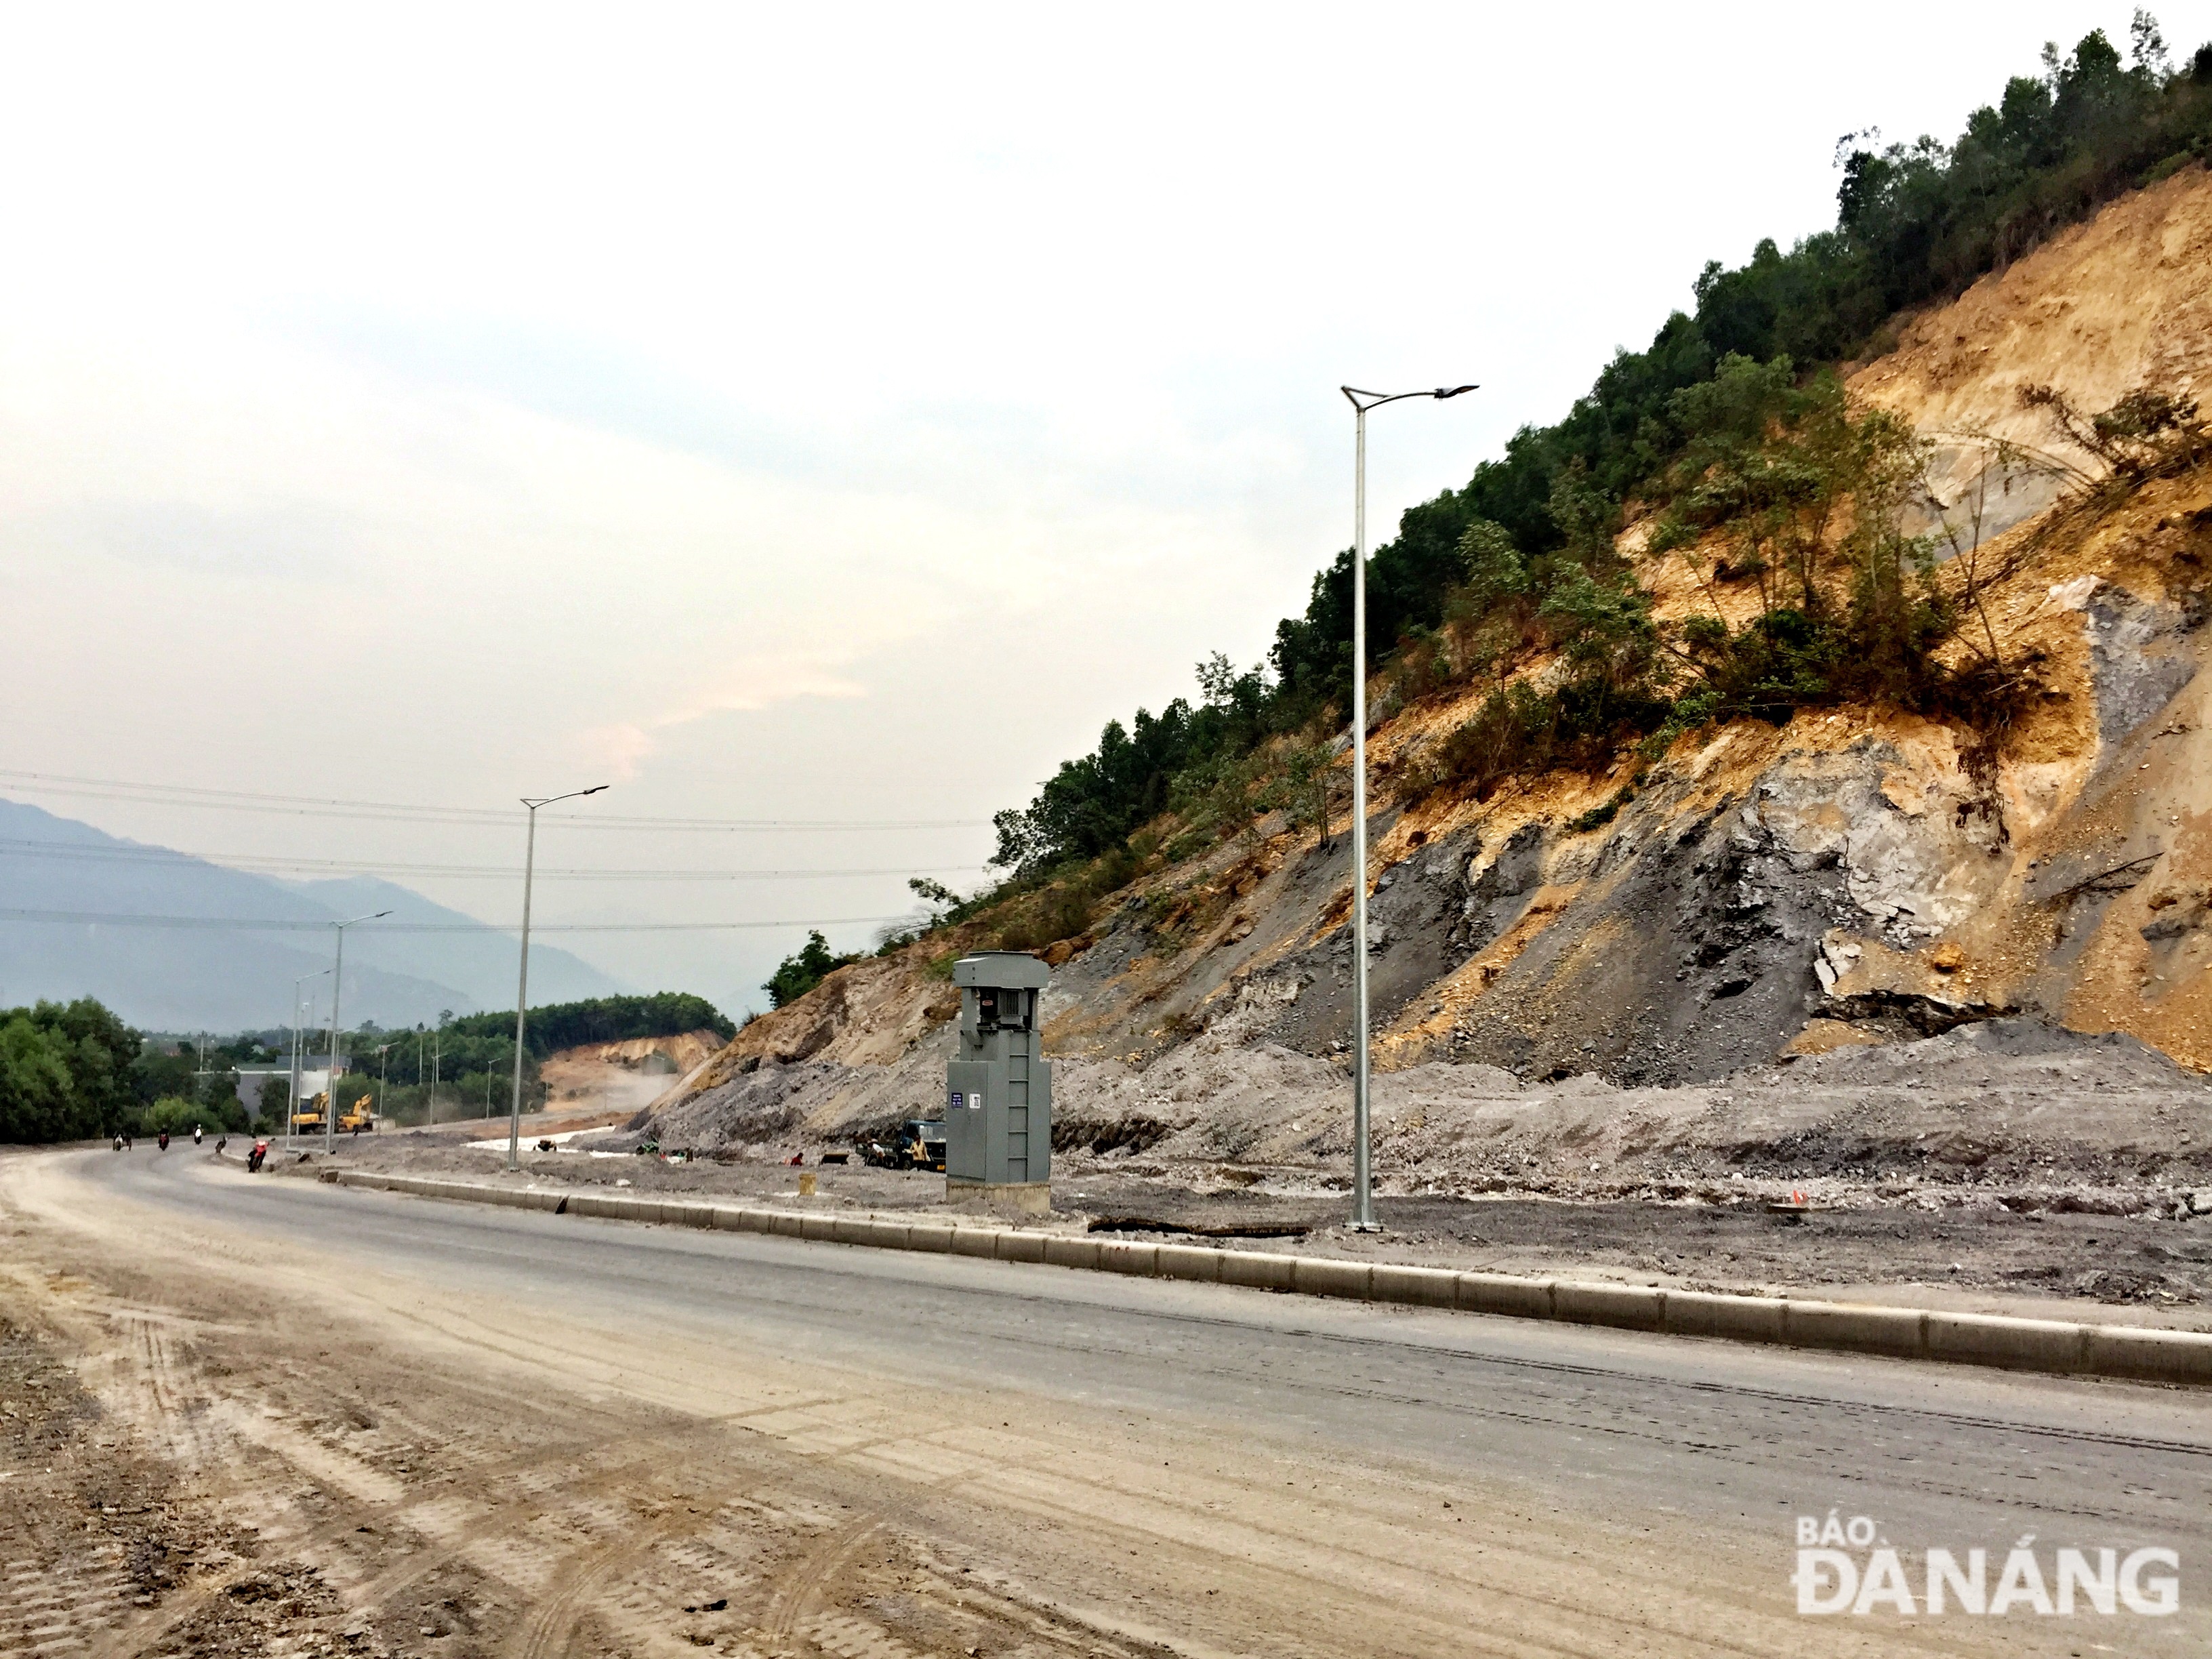 The landslide area during the floods at the end of last year, the heaviest of which was the section km5+500 - km6+780 through Hoa Phu Commune is being treated to open traffic.